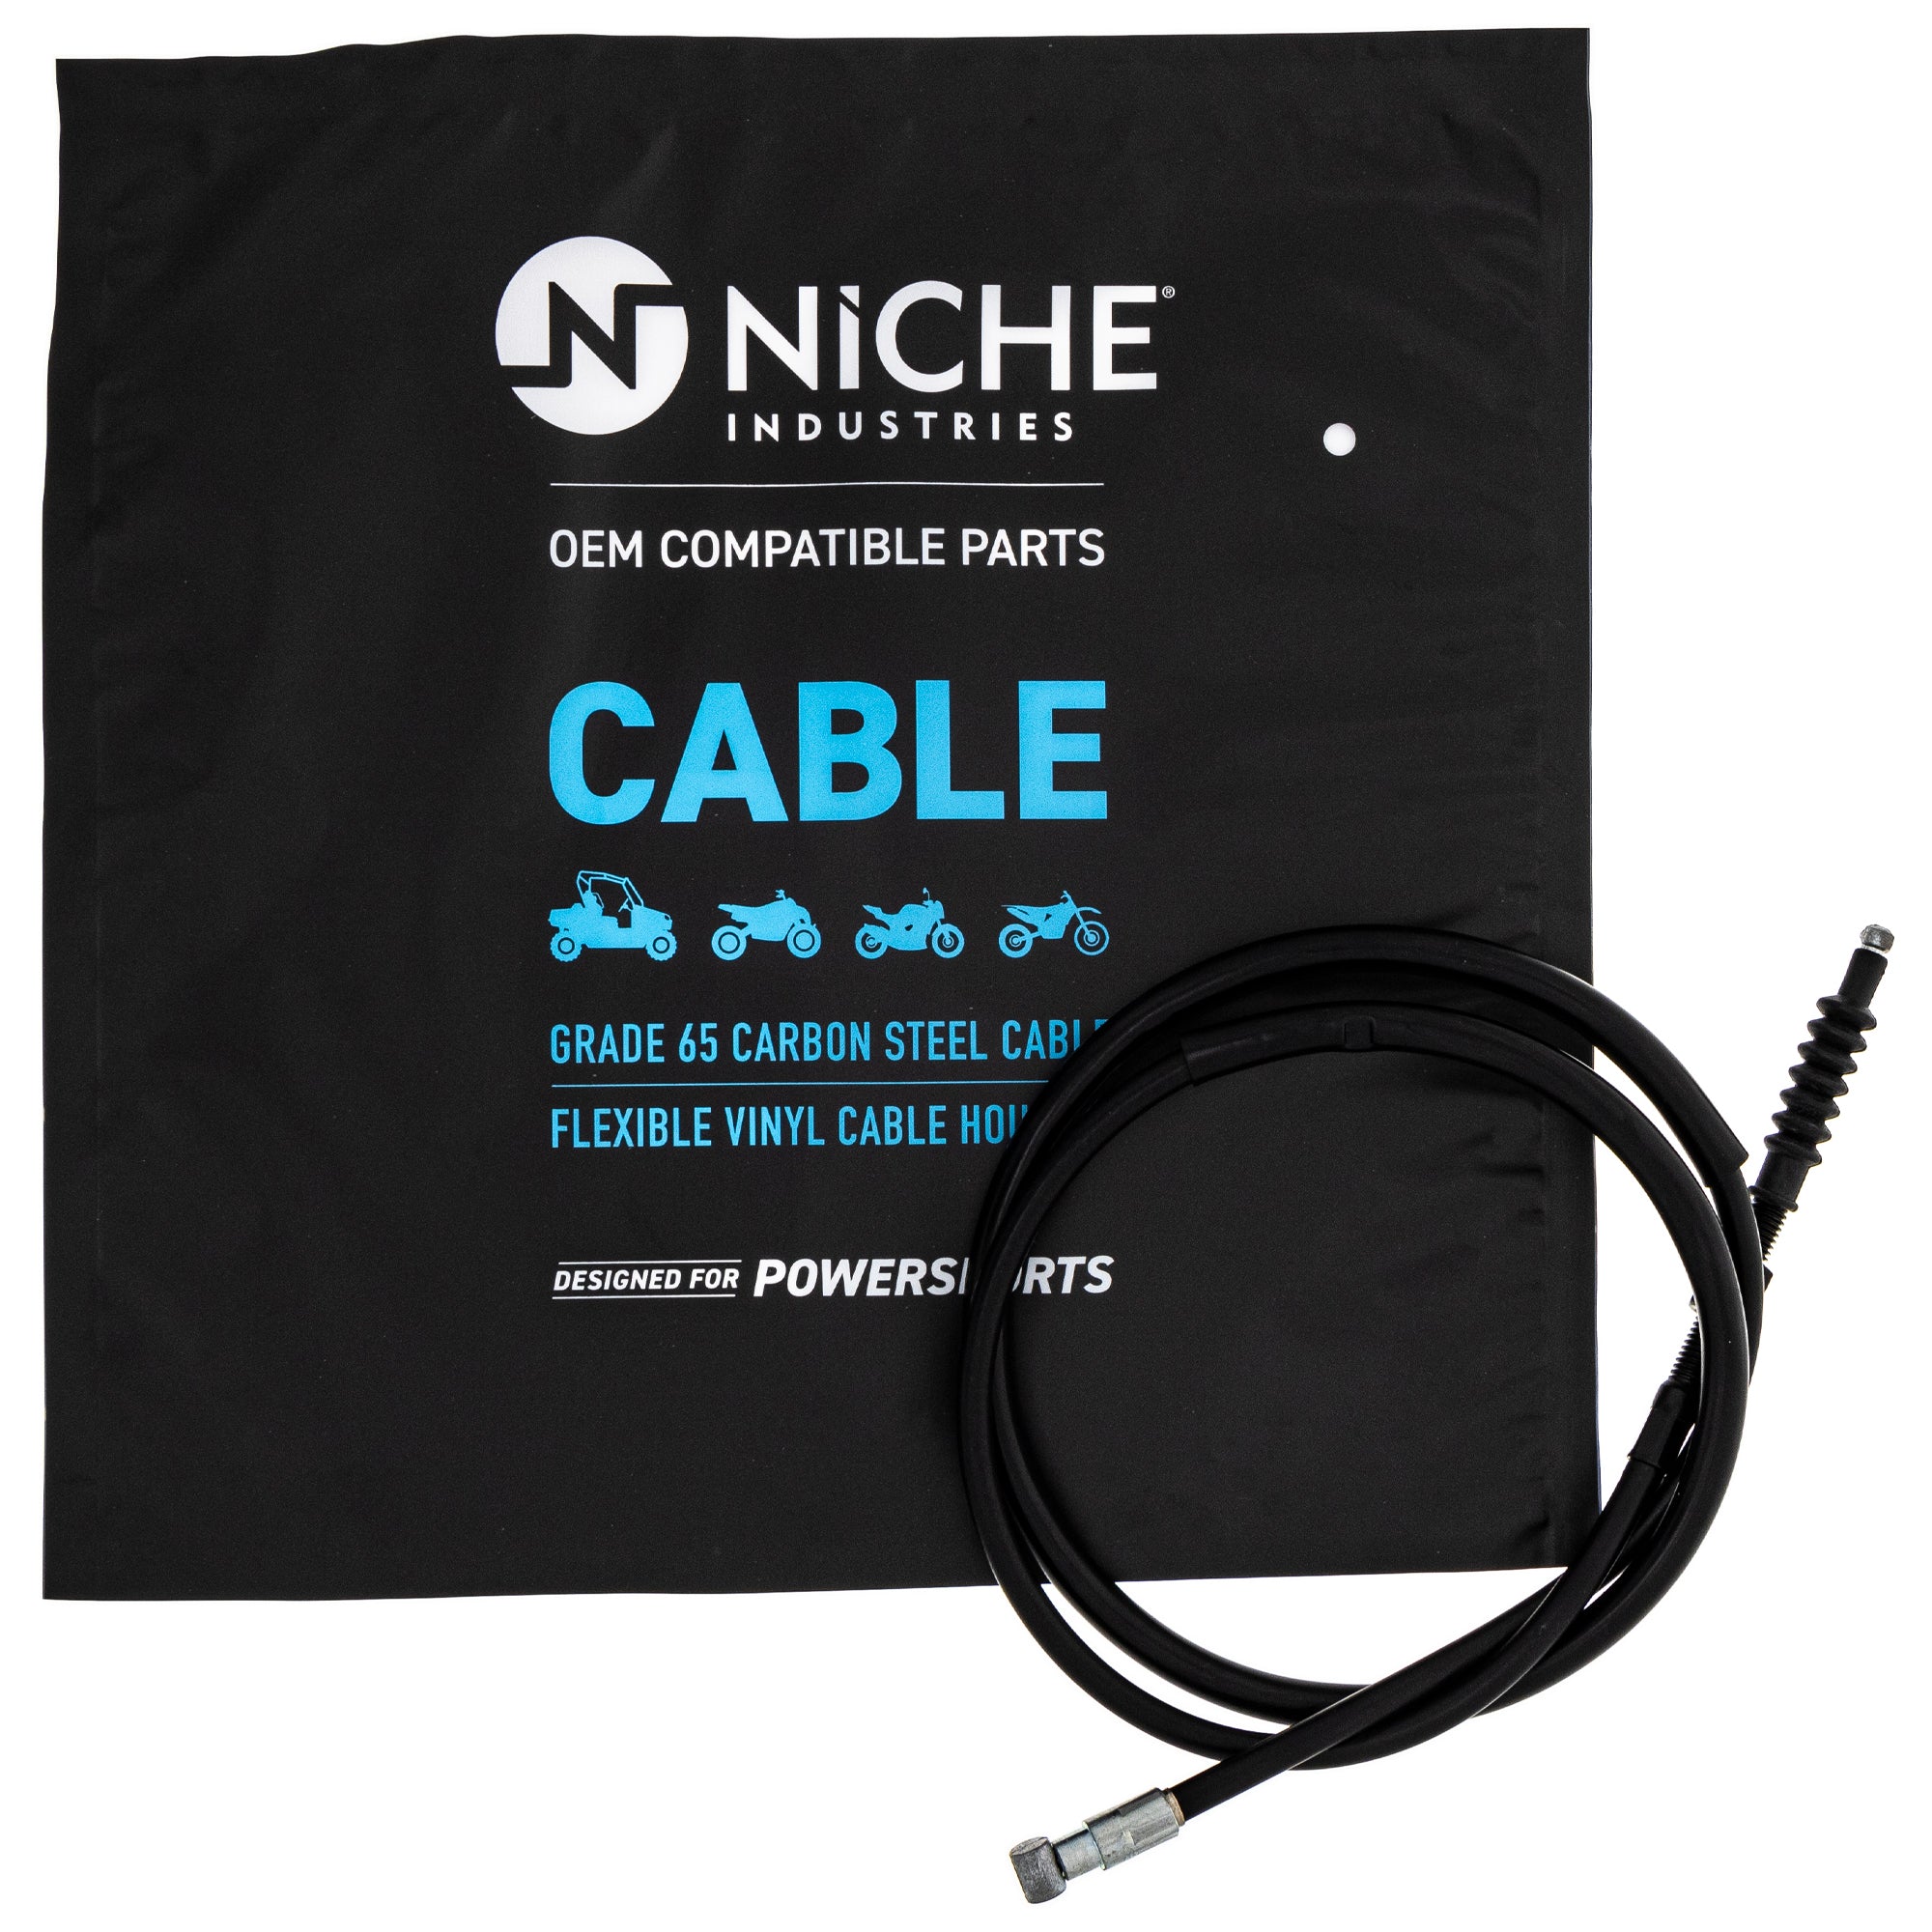 NICHE 519-CCB2220L Clutch Cable for zOTHER Warrior TT350